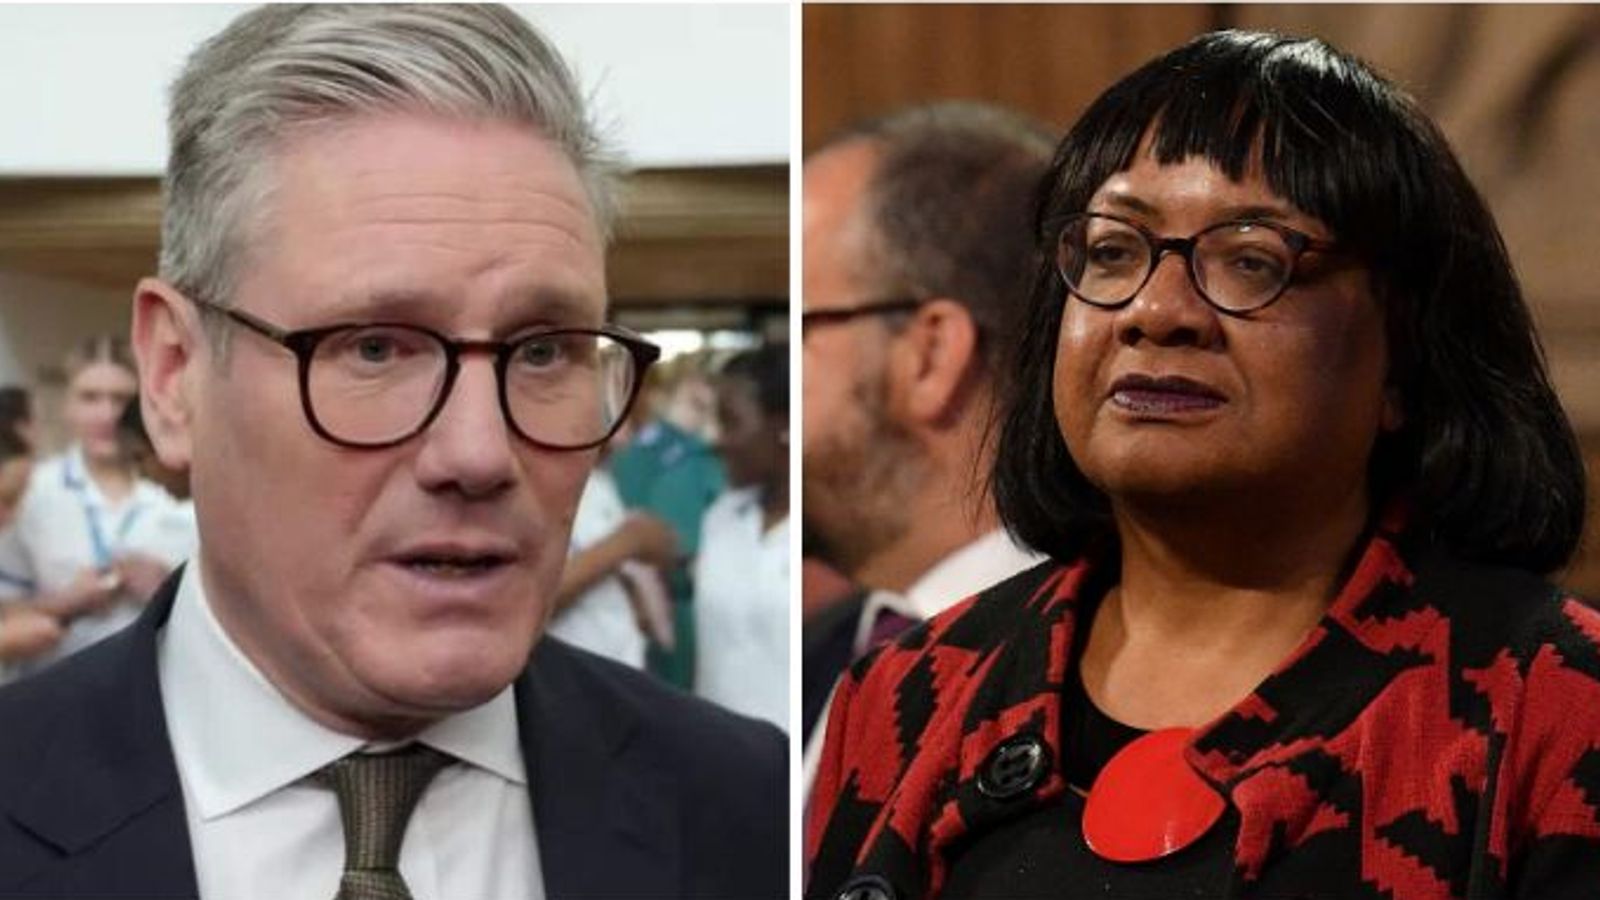 Diane Abbott 'free' to stand for Labour at general election, Sir Keir Starmer says